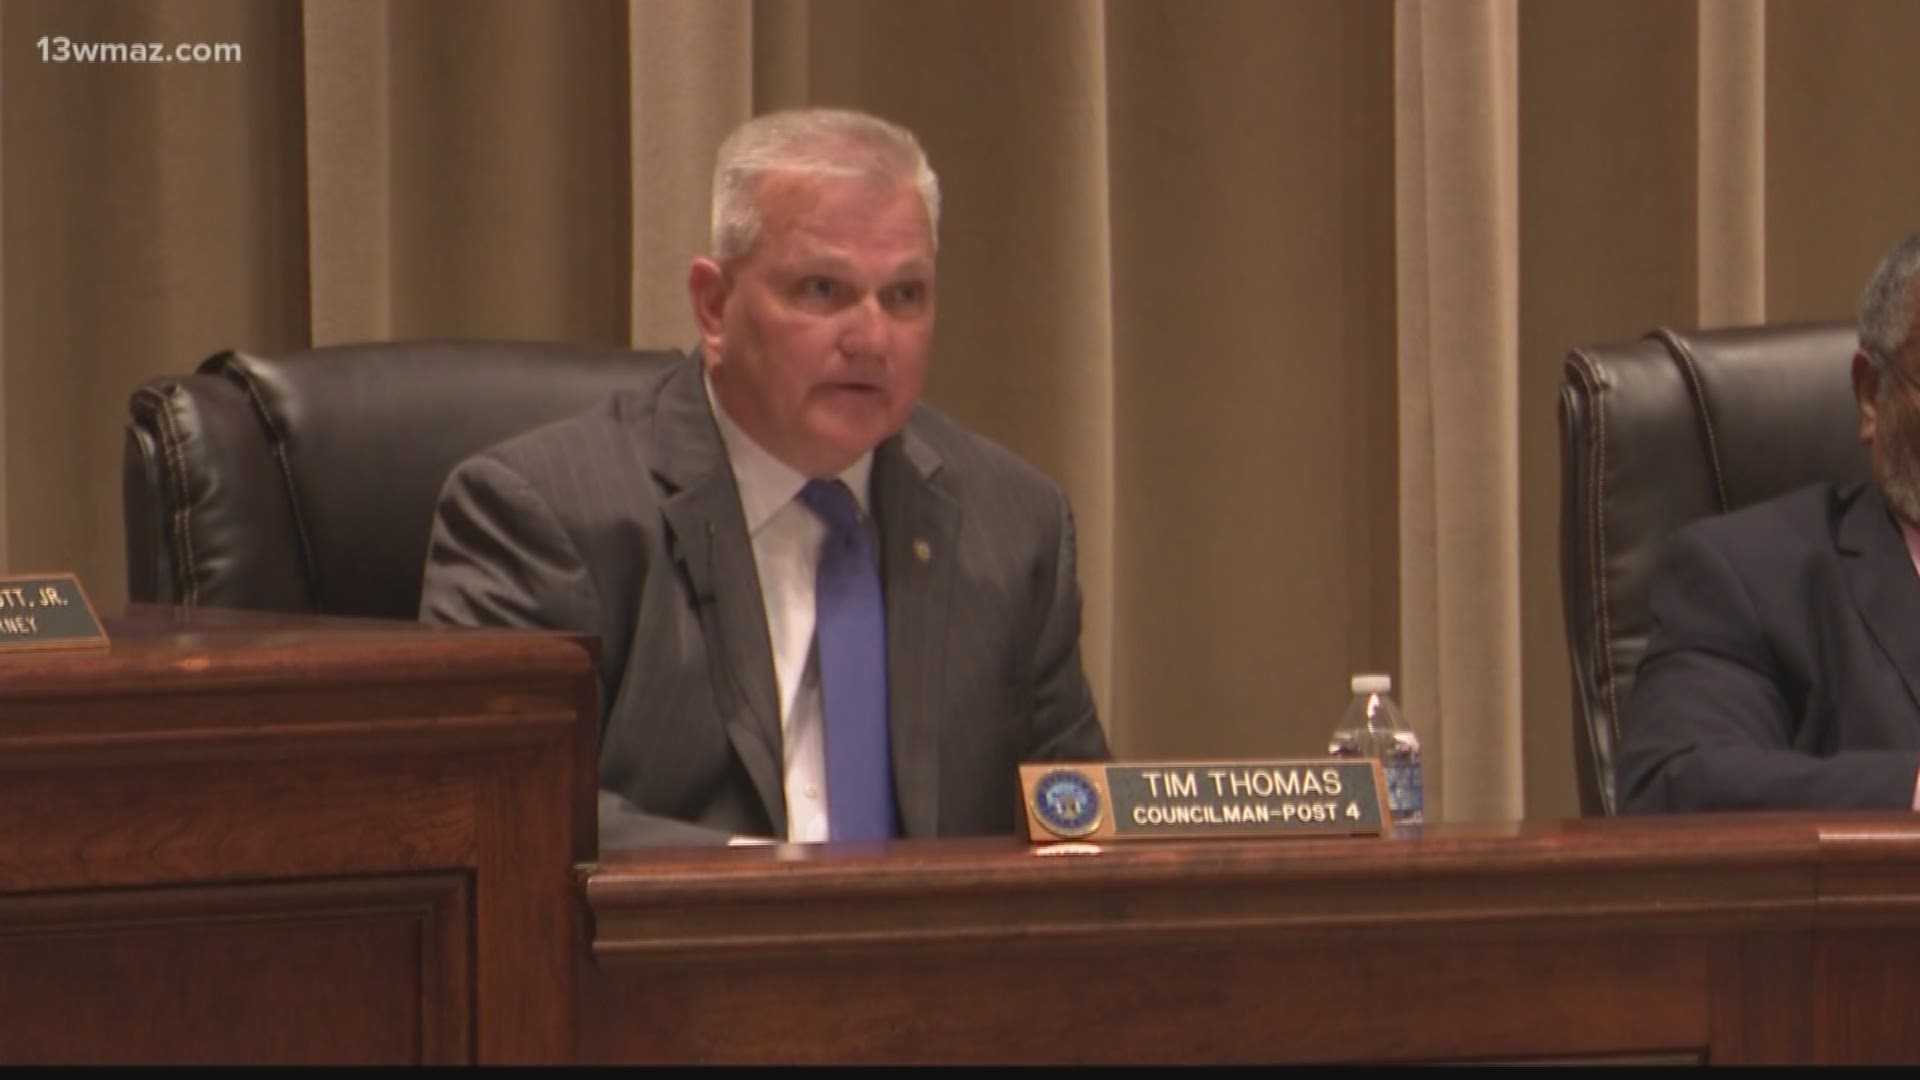 At the most recent Warner Robins City Council meeting, councilman Tim Thomas made some eye-opening claims about morale in the police department, but are they true?